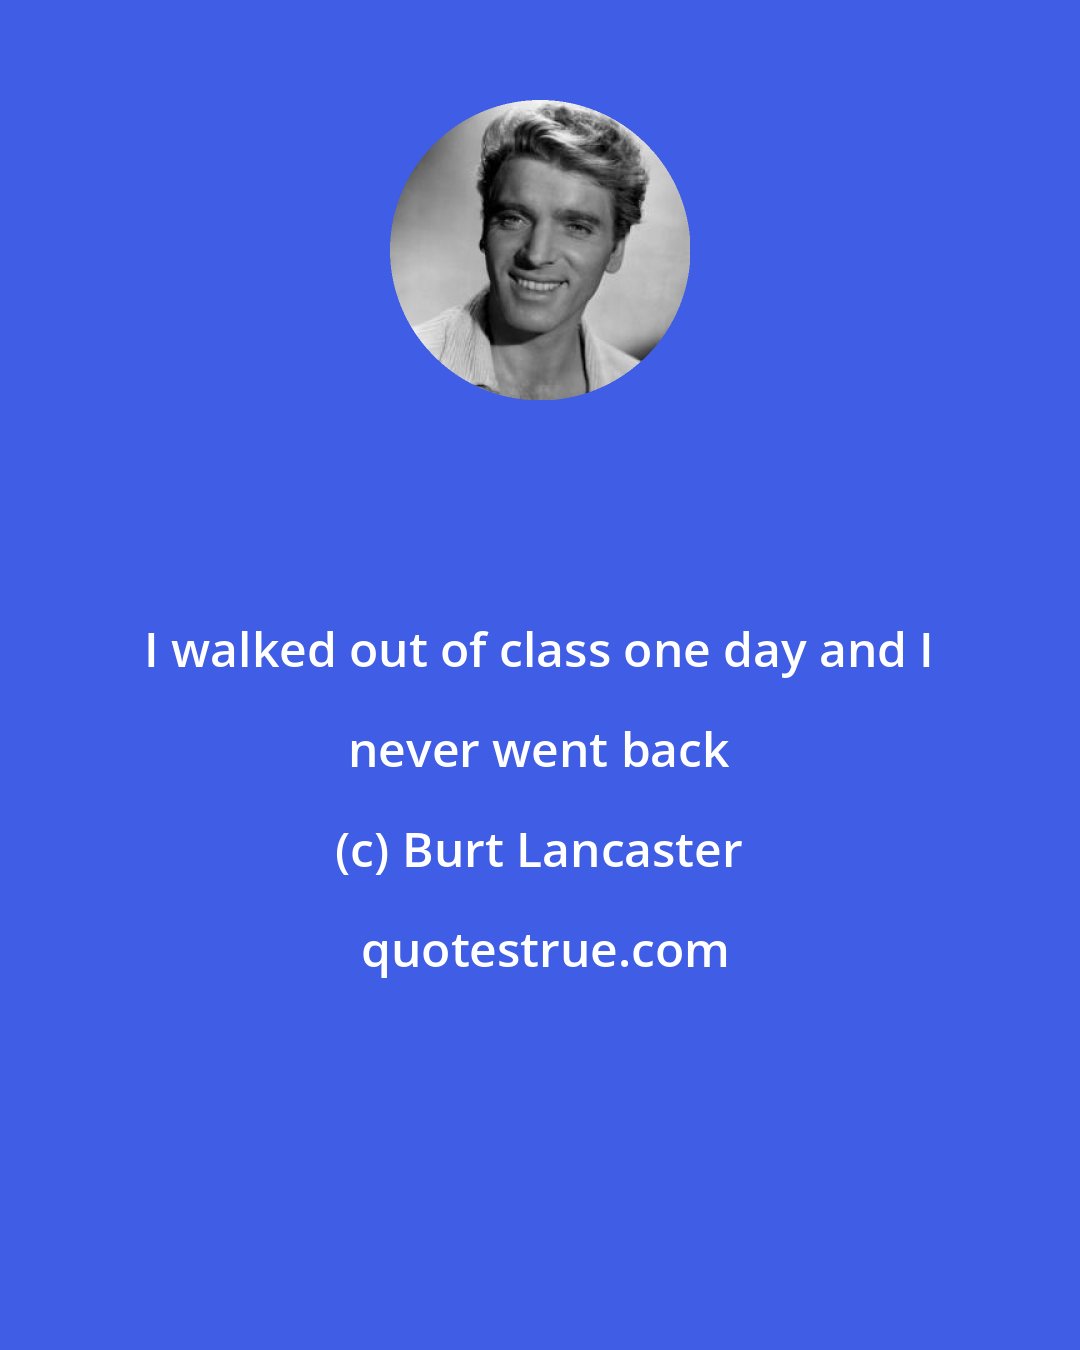 Burt Lancaster: I walked out of class one day and I never went back